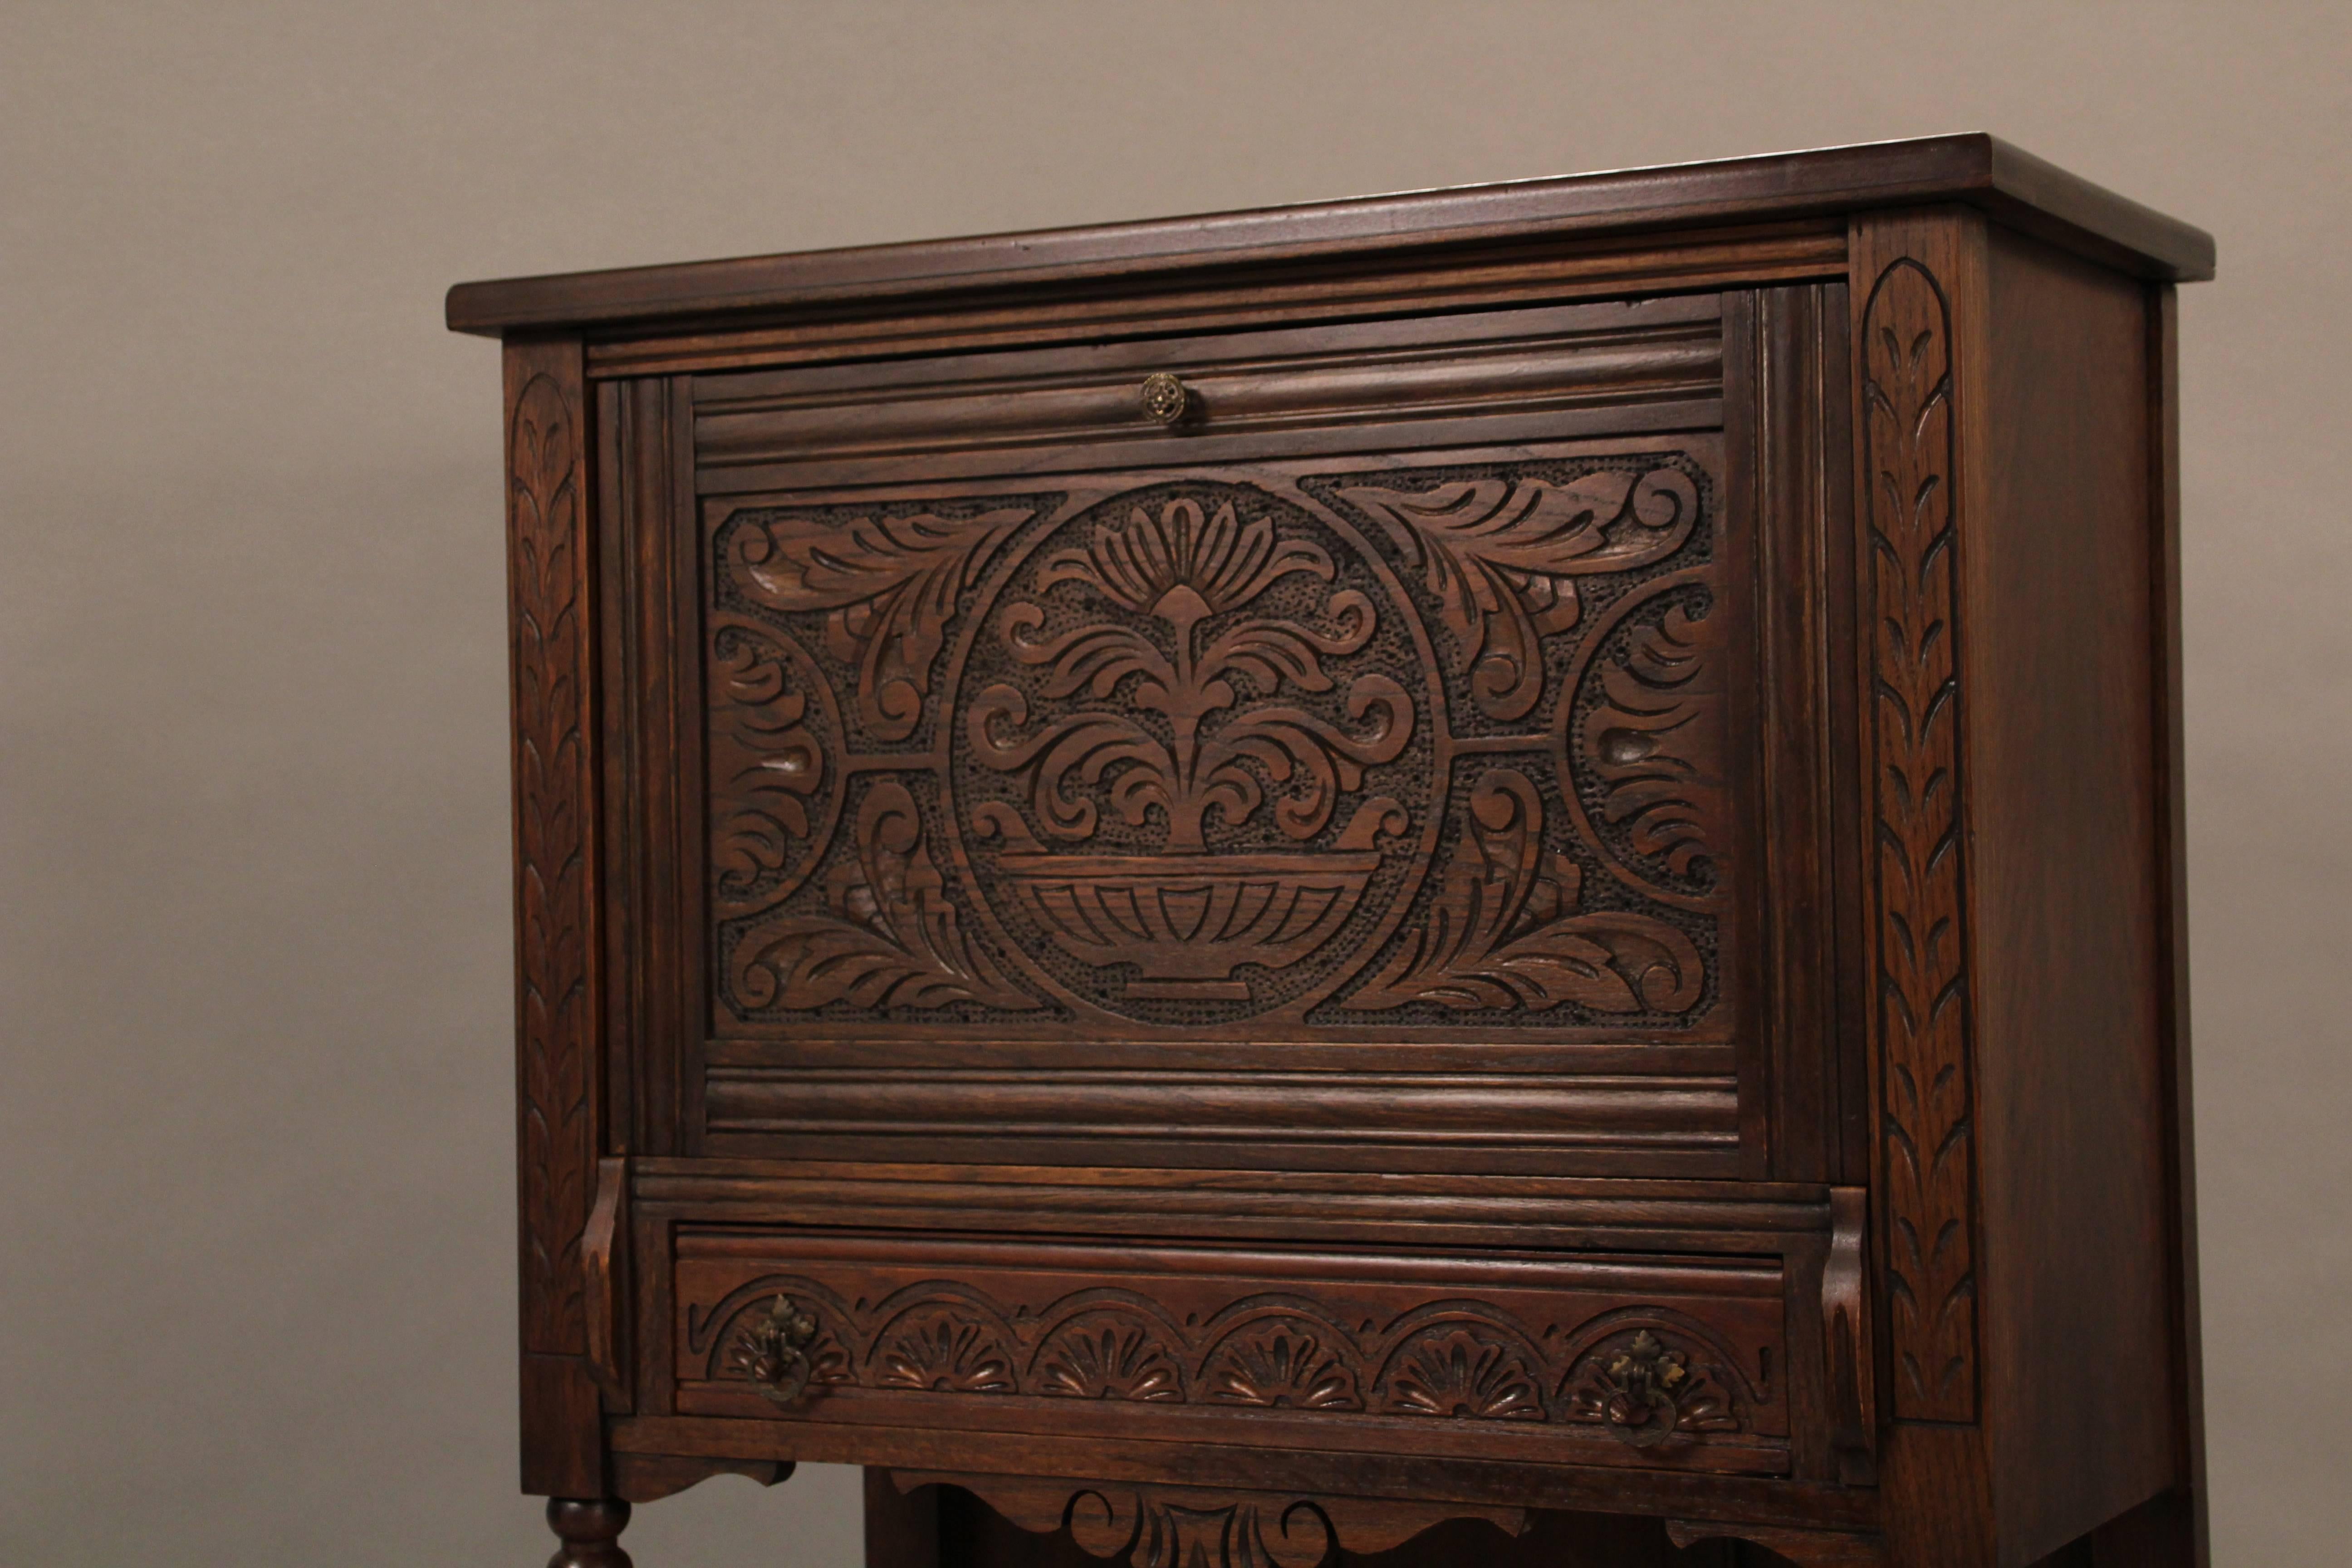 1920s carved vargueno type desk with drop from panel that converts into a writing desk.